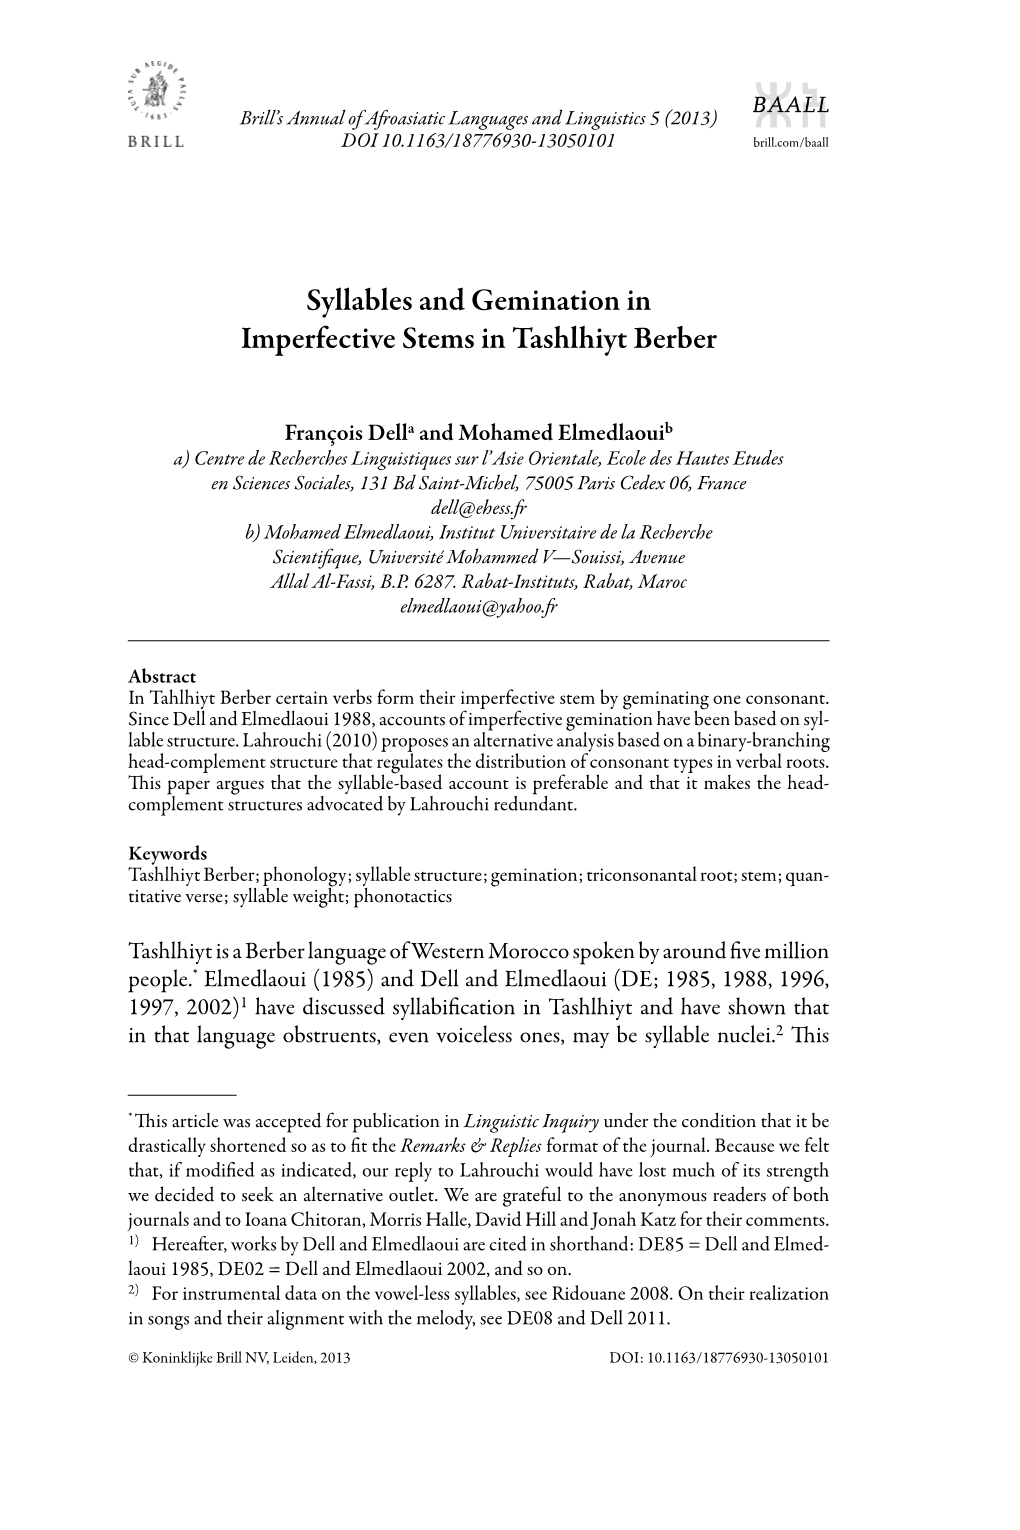 Syllables and Gemination in Imperfective Stems in Tashlhiyt Berber